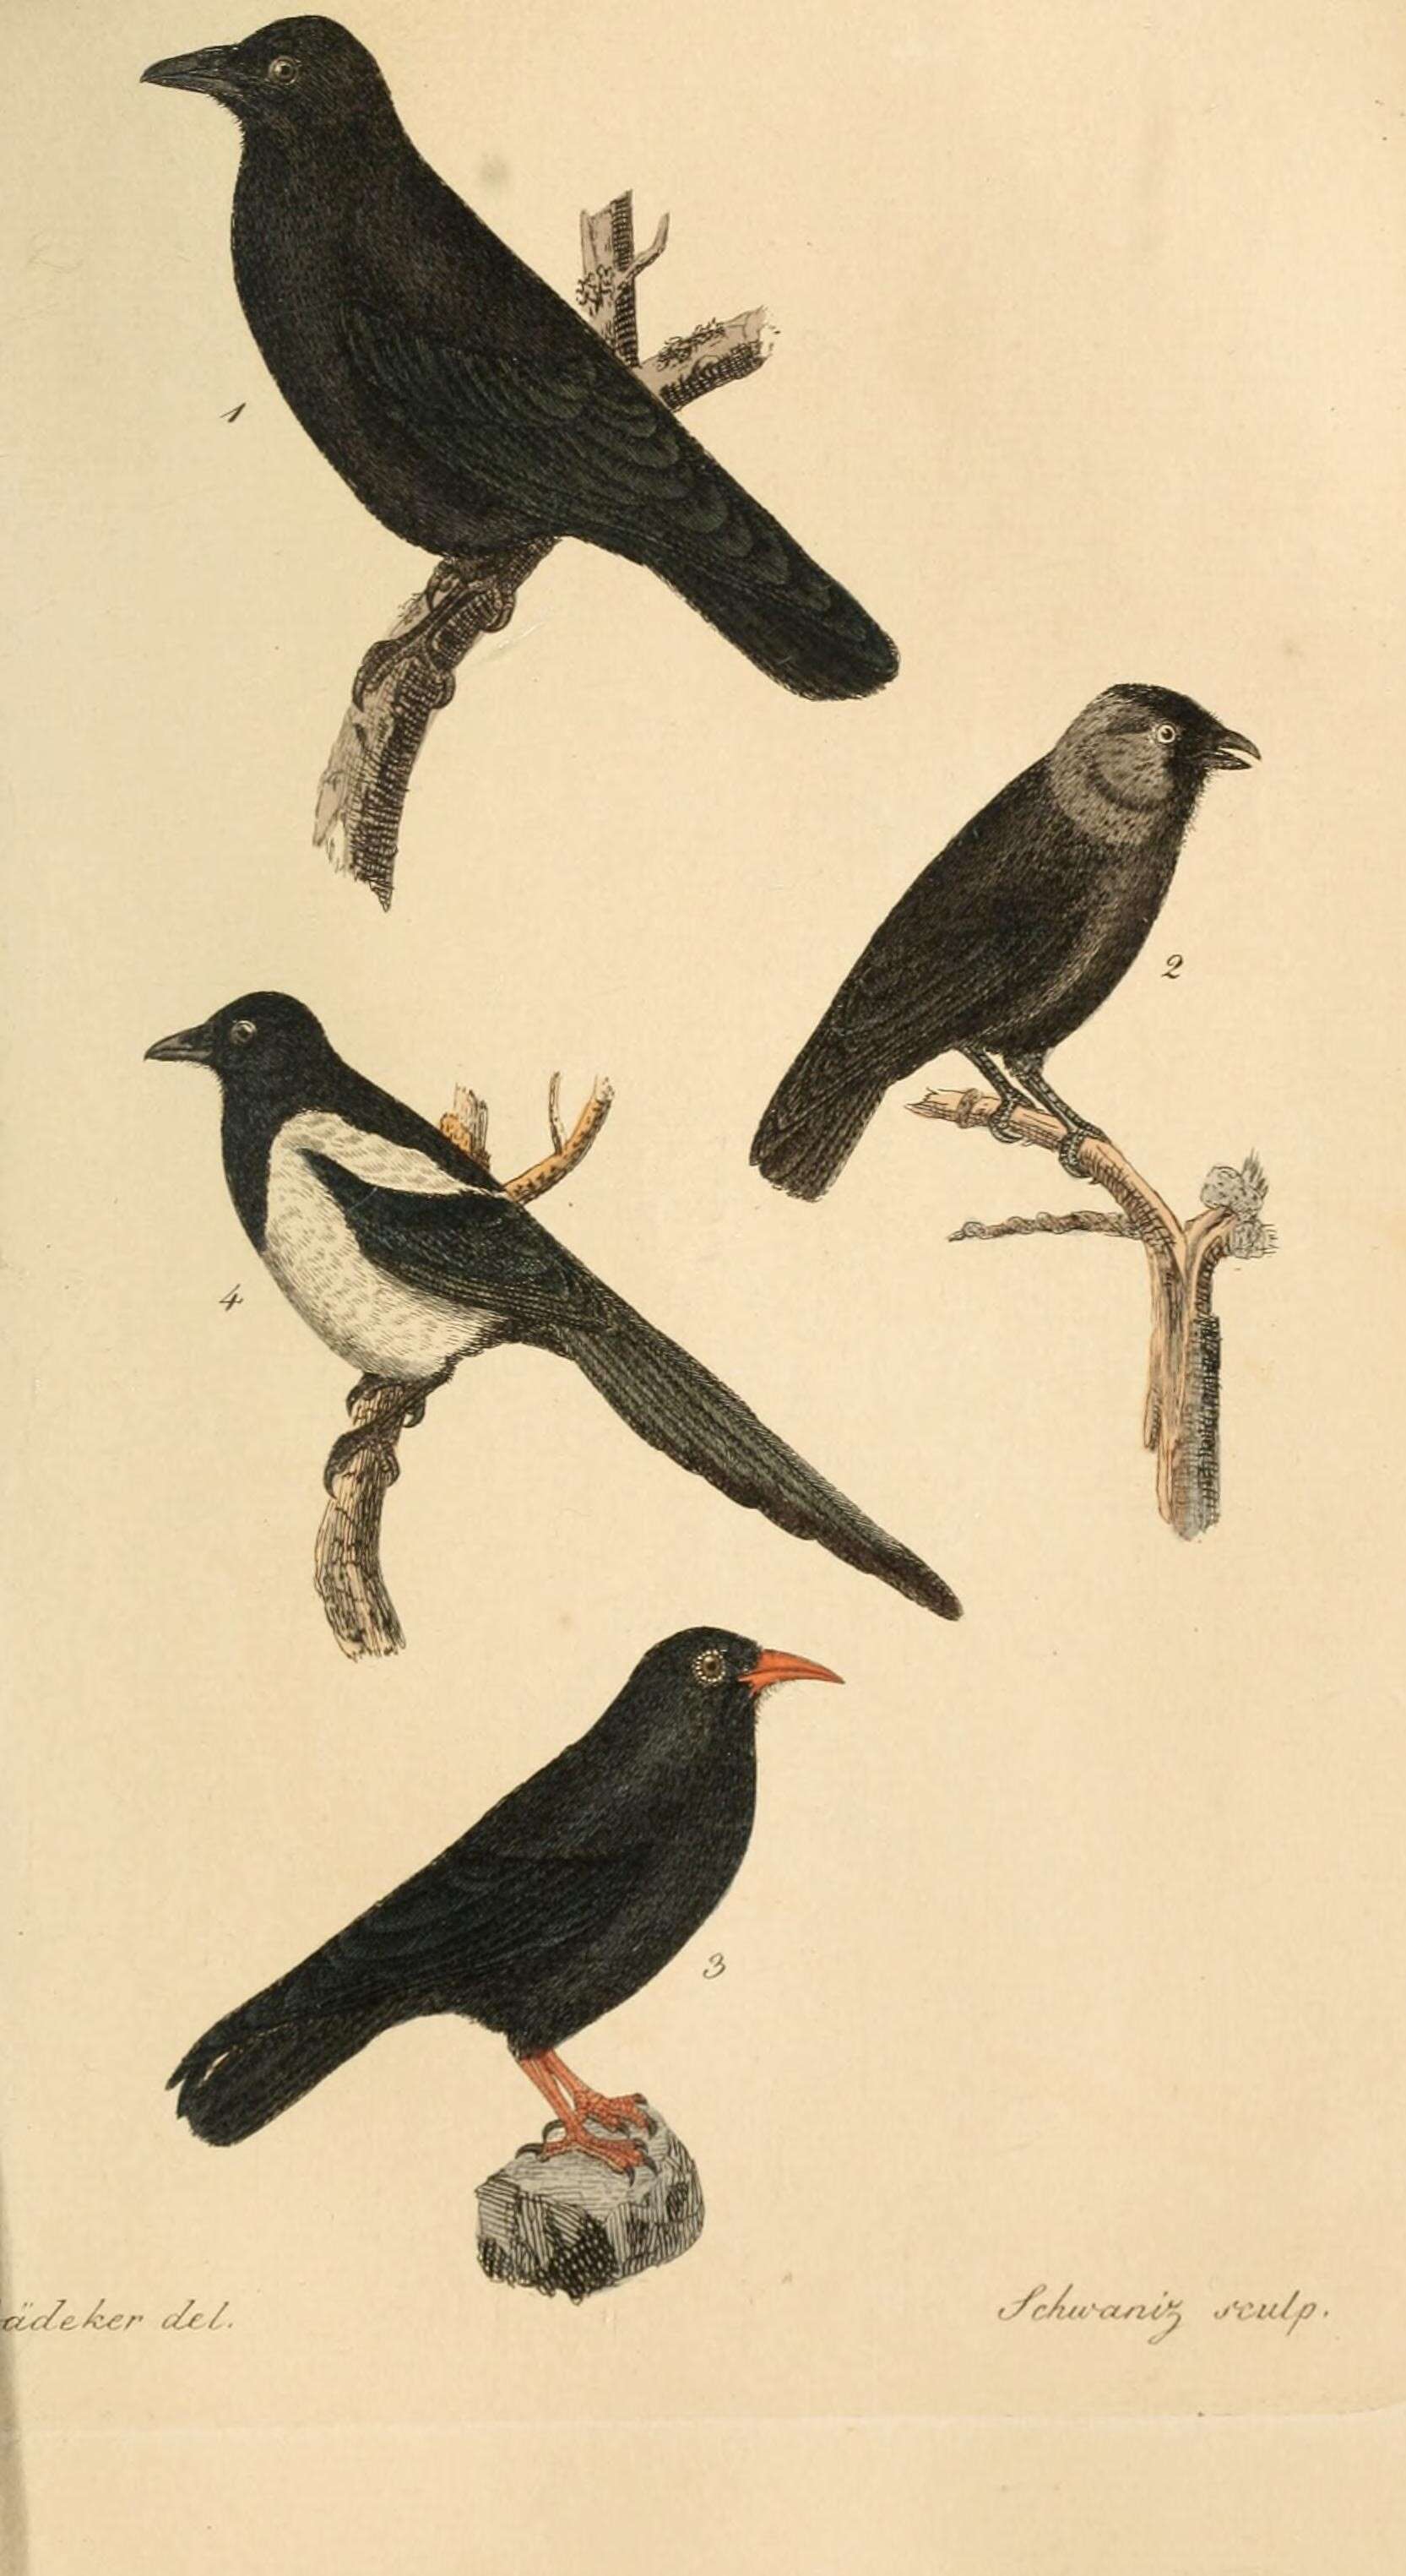 Image of crows and jays